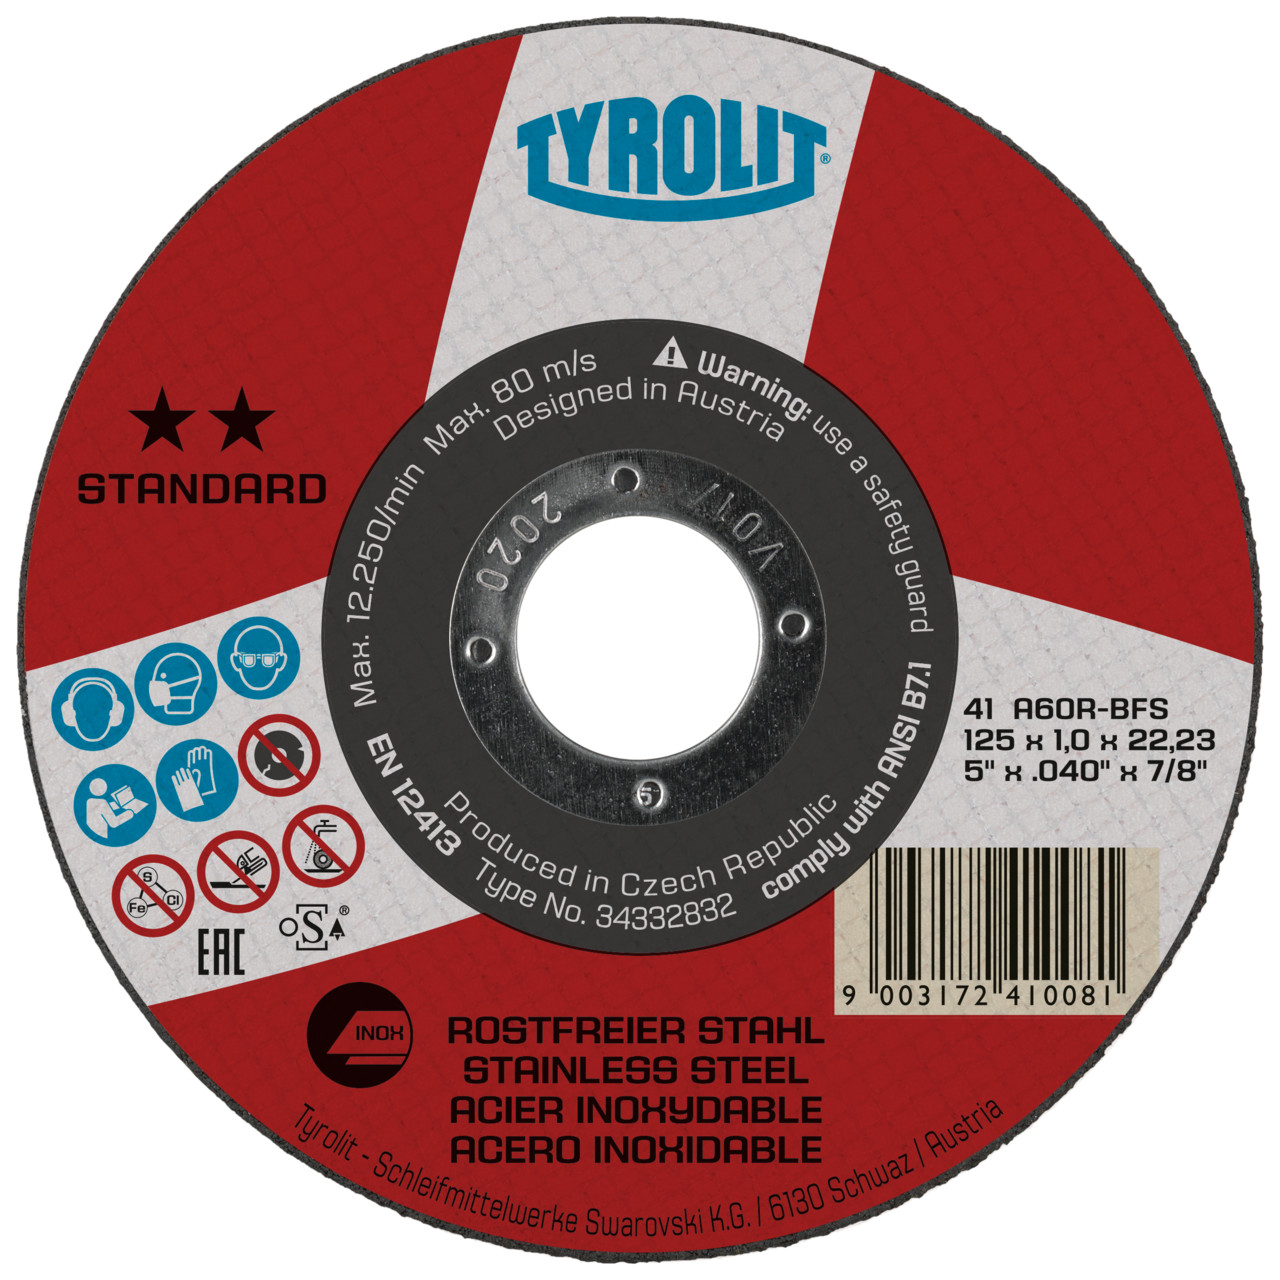 Tyrolit Cutting discs DxDxH 230x2.5x22.23 For stainless steel, shape: 41 - straight version, Art. 367582